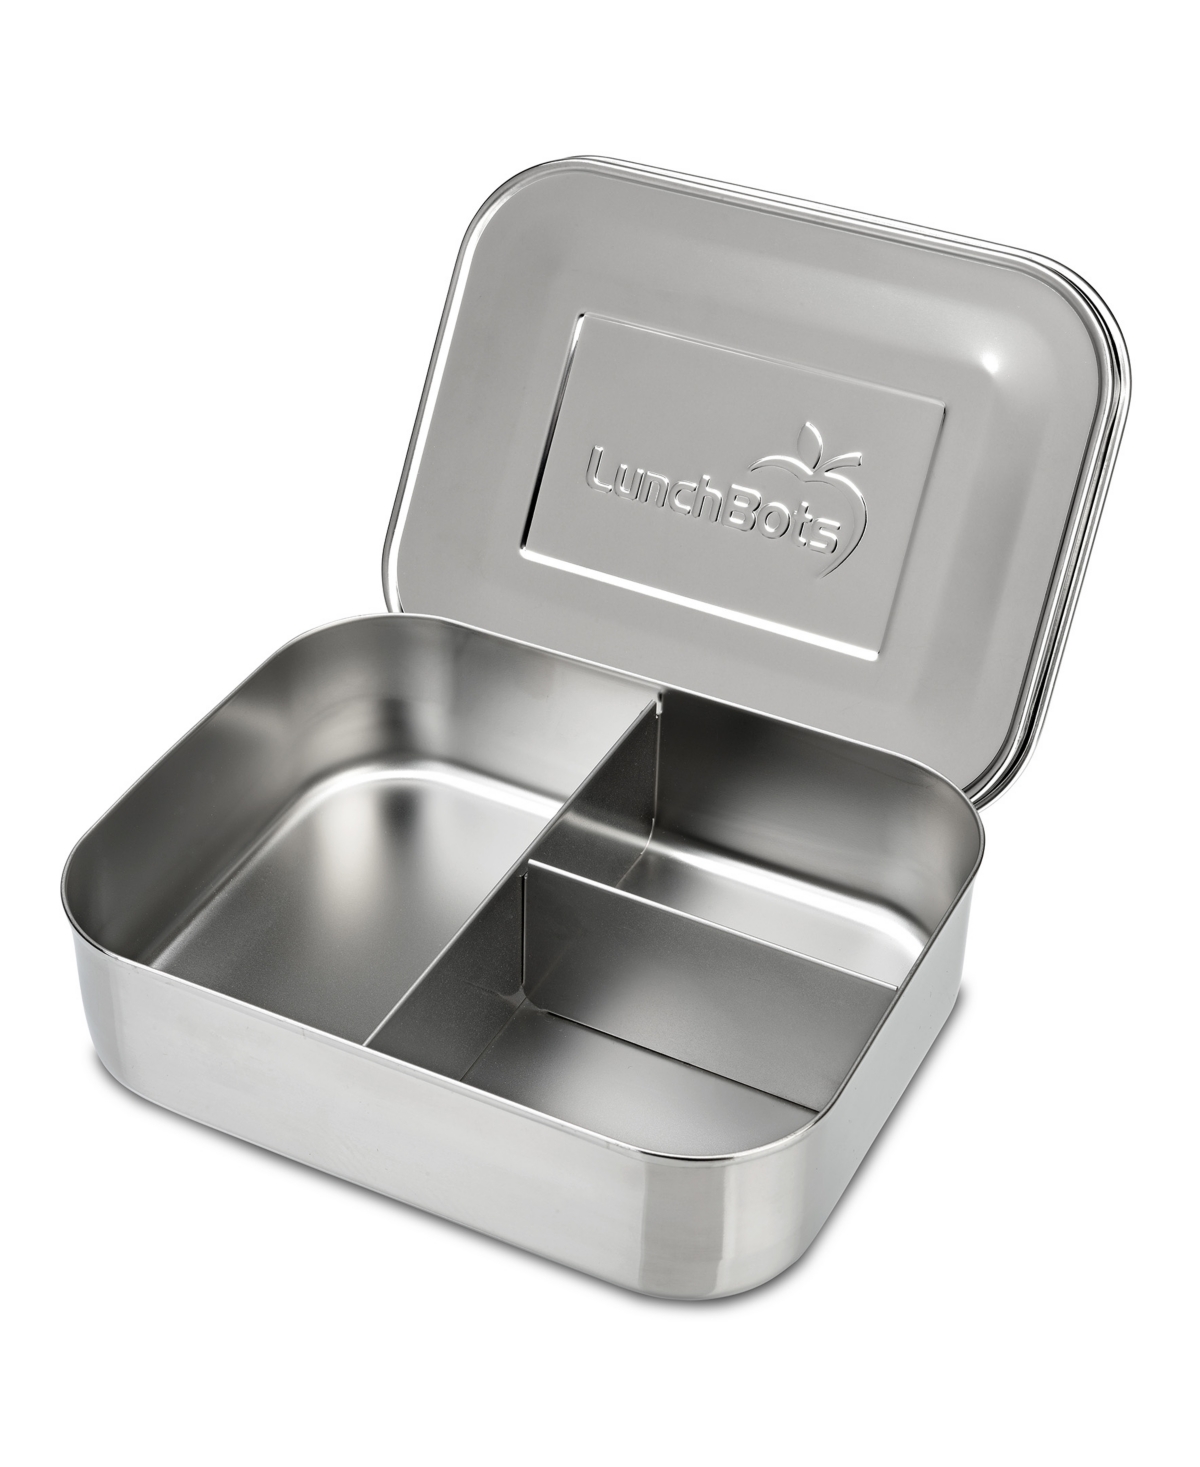 Lunchbots Stainless Steel Bento Lunch Box 3 Sections